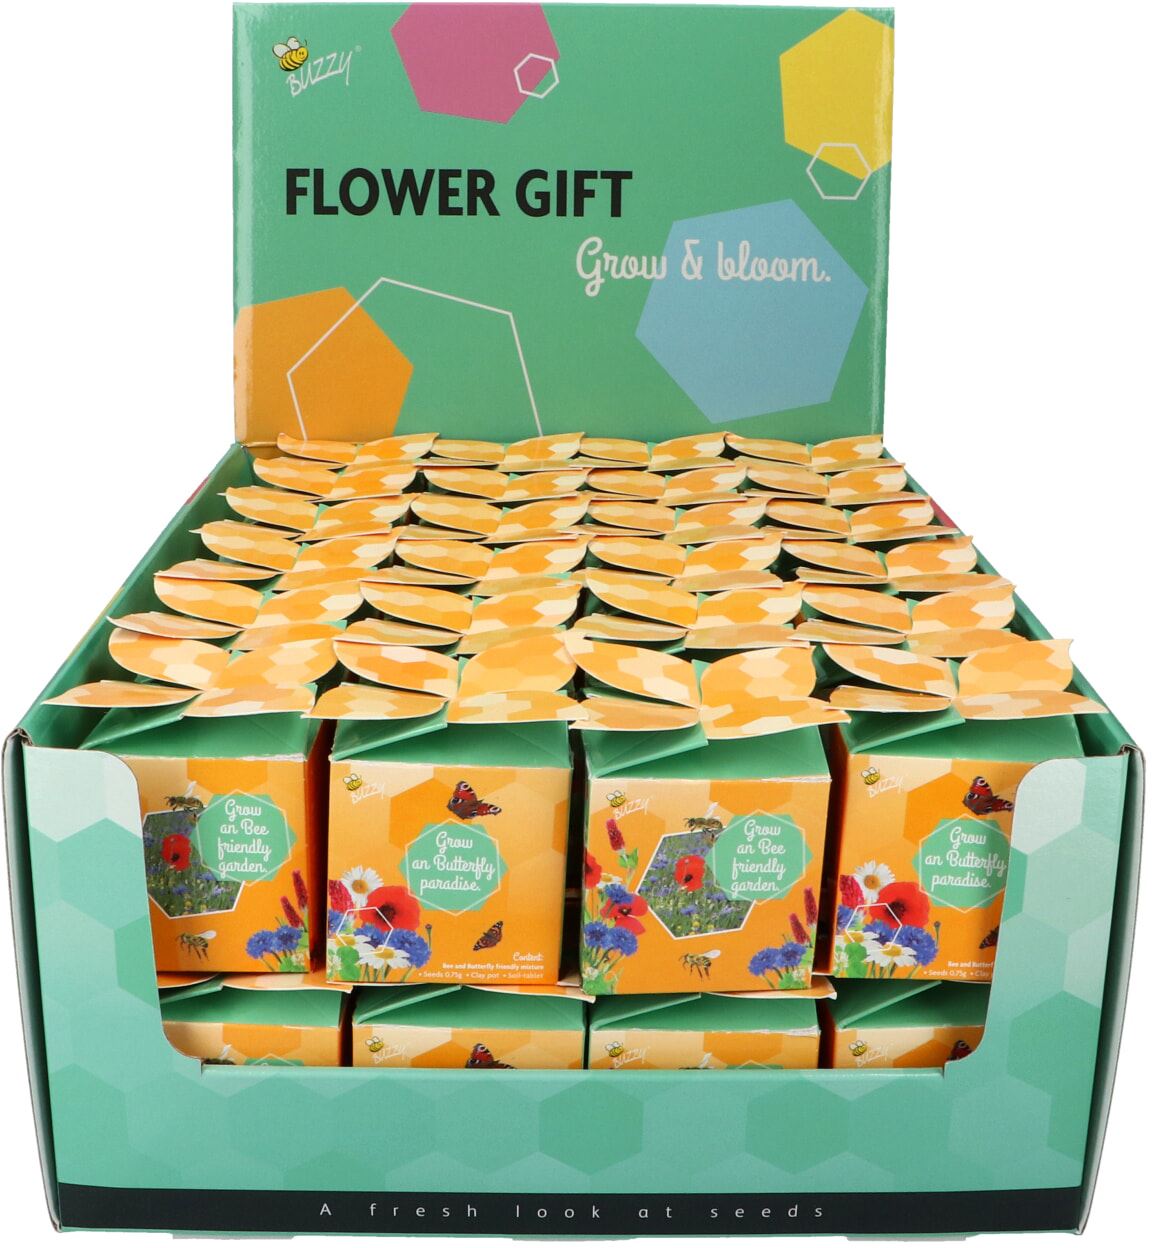 Buzzy-Display-Flower-Gift-Insect-Flower-mix-48-